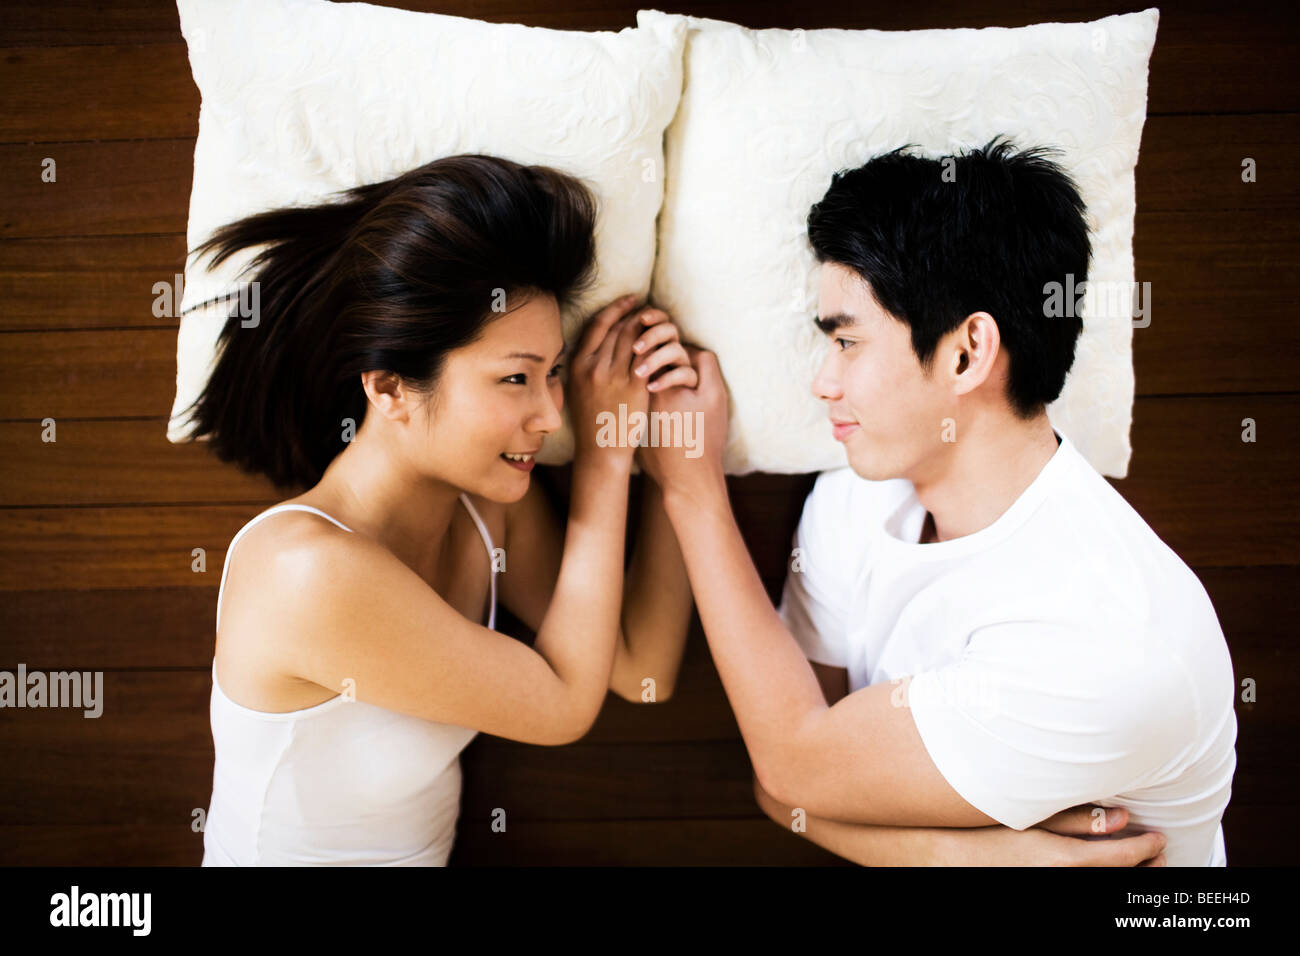 Asian Young couple lying on floor looking at each other smiling holding hands Stock Photo